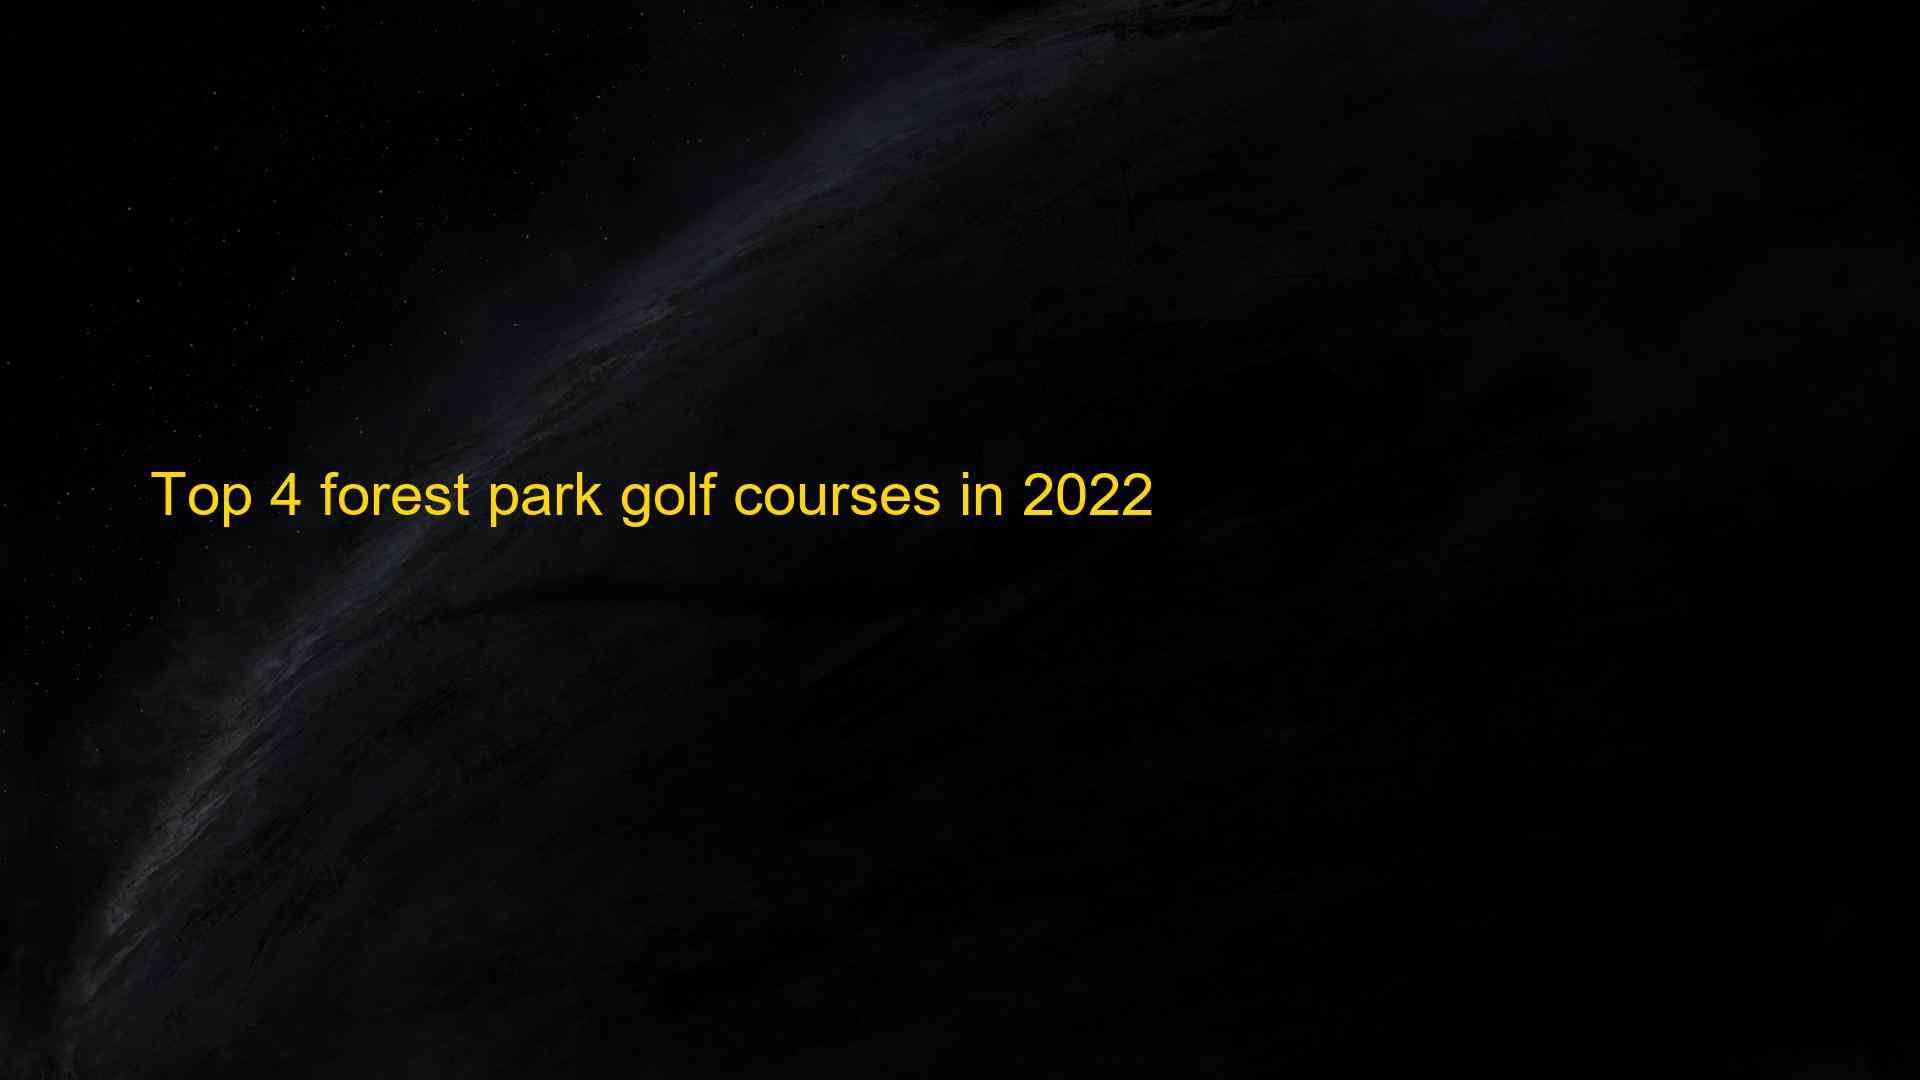 Top 4 forest park golf courses in 2022 1660872817